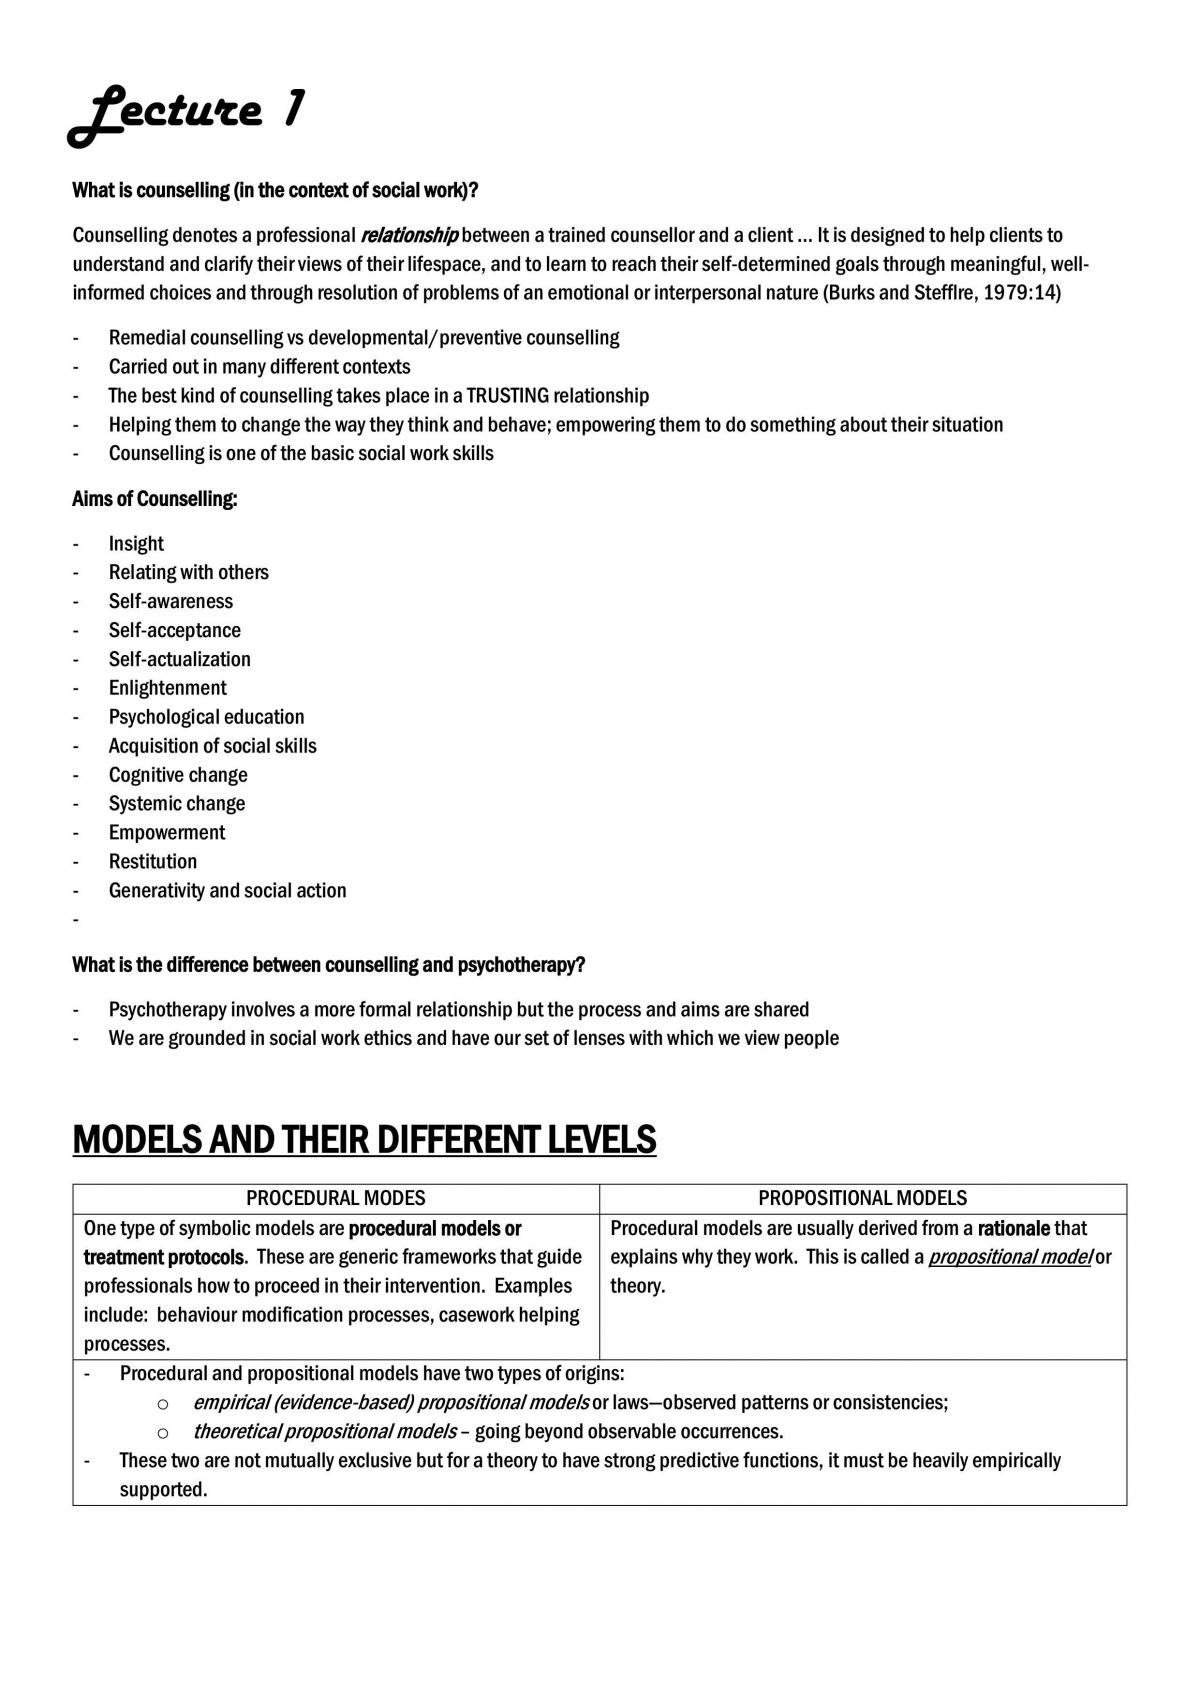 SW3209 Counselling Theories & Practice Study Notes - Page 1